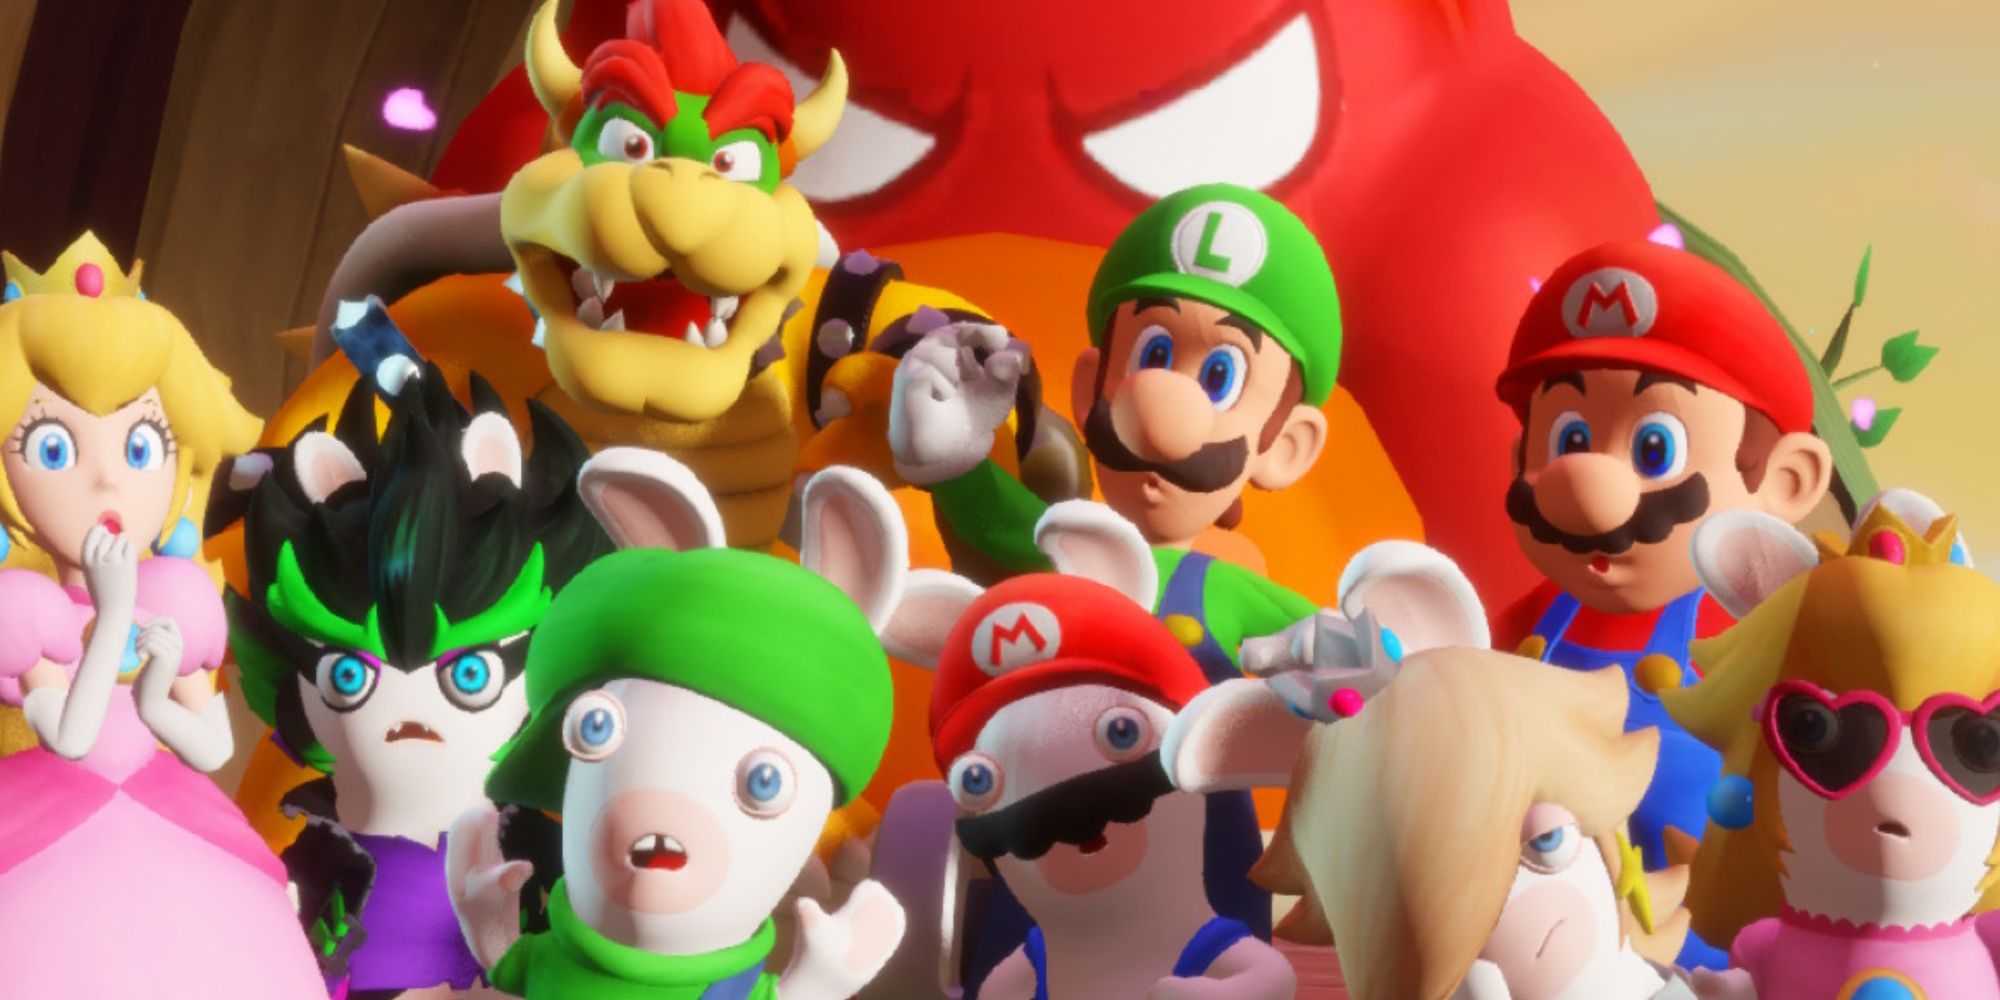 9 Biggest Differences in Mario + Rabbids: Sparks of Hope from the Original